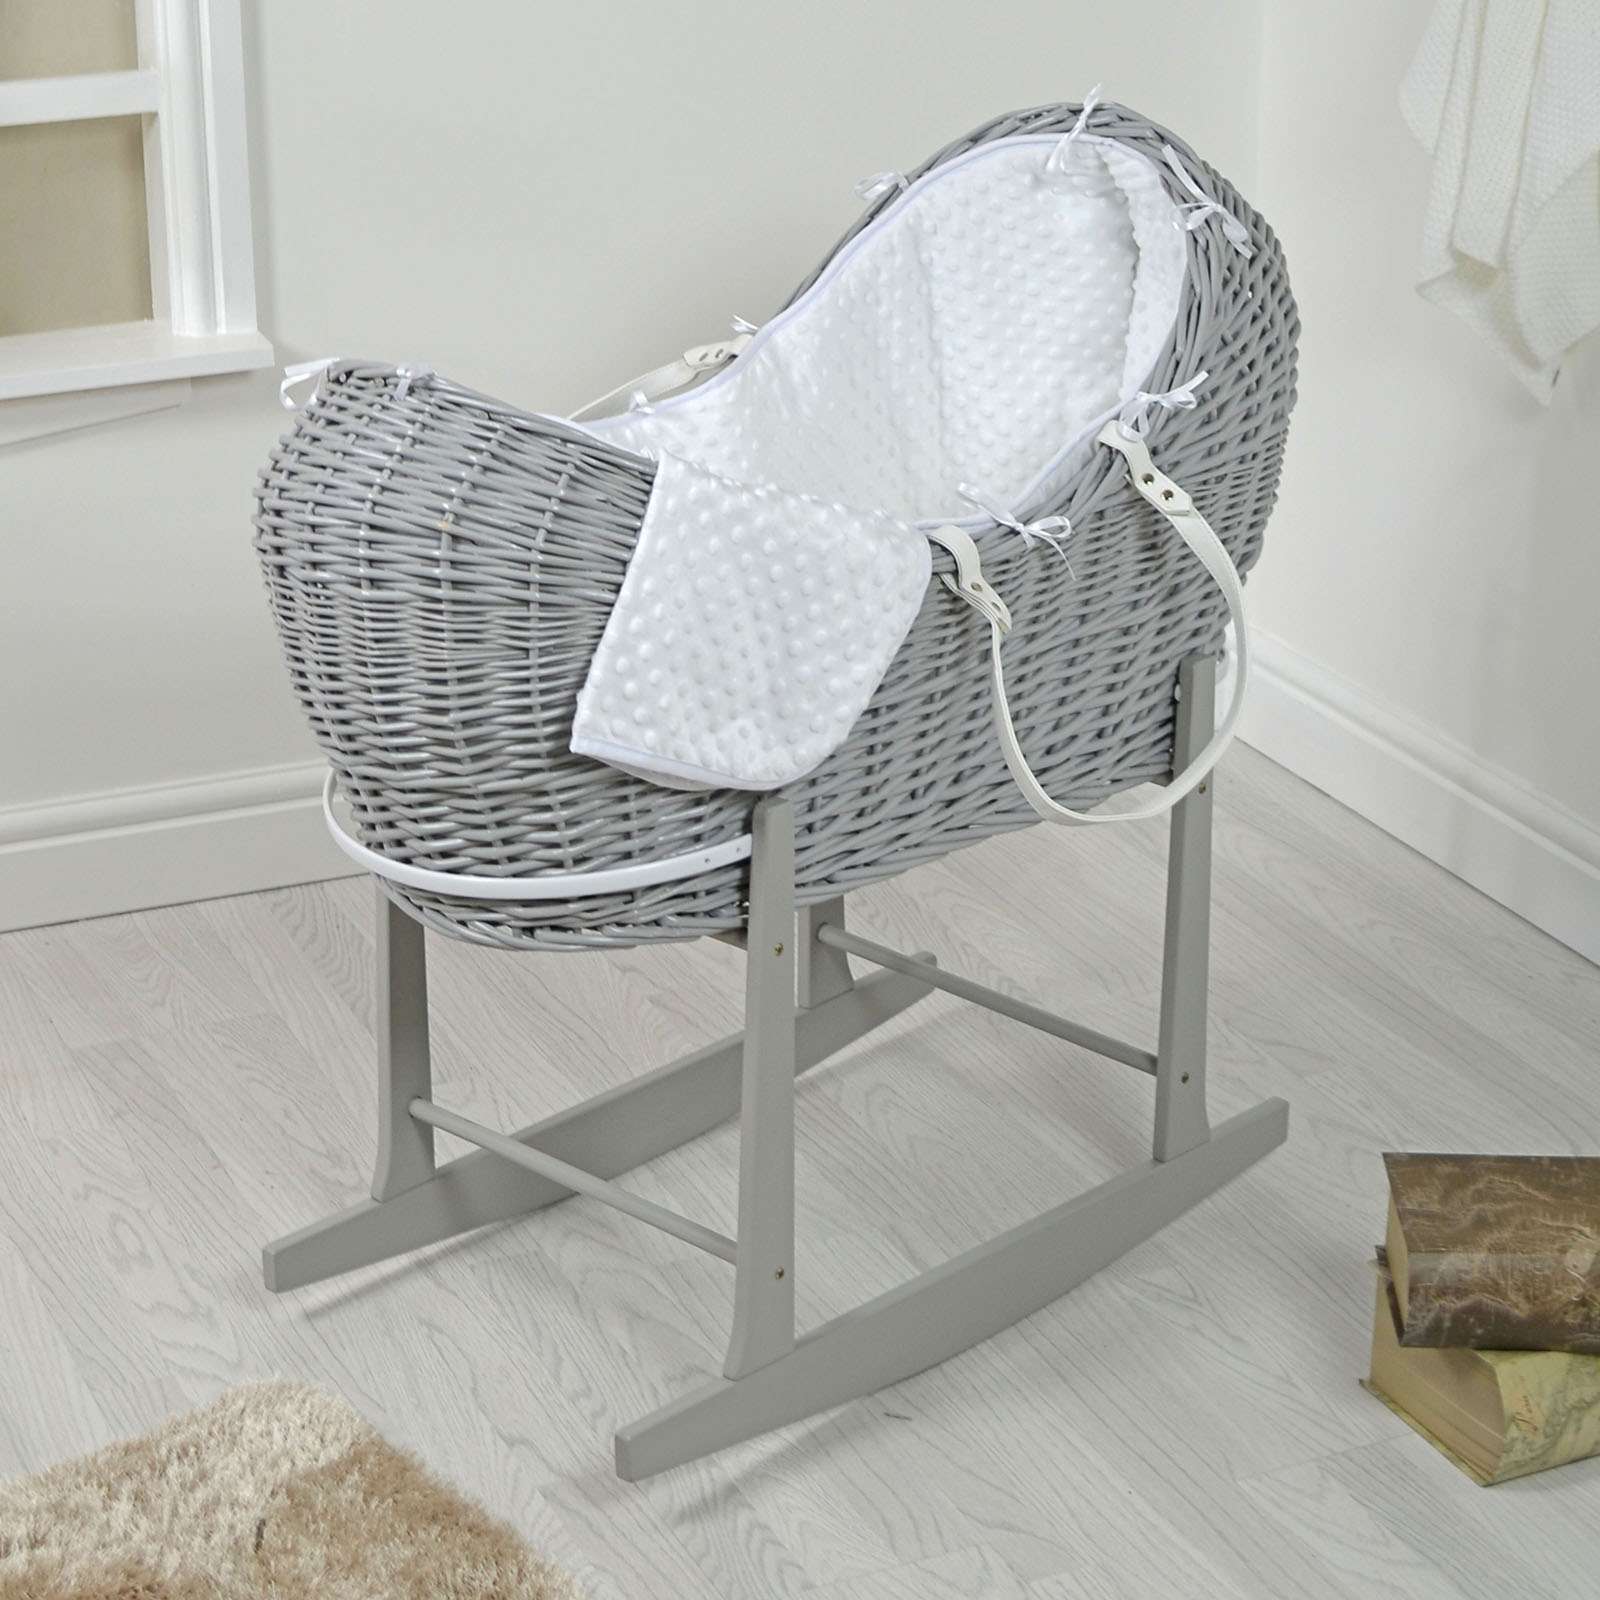 4baby Grey Wicker Sleep Pod Moses Basket & Grey Rocking Stand - White Dimple